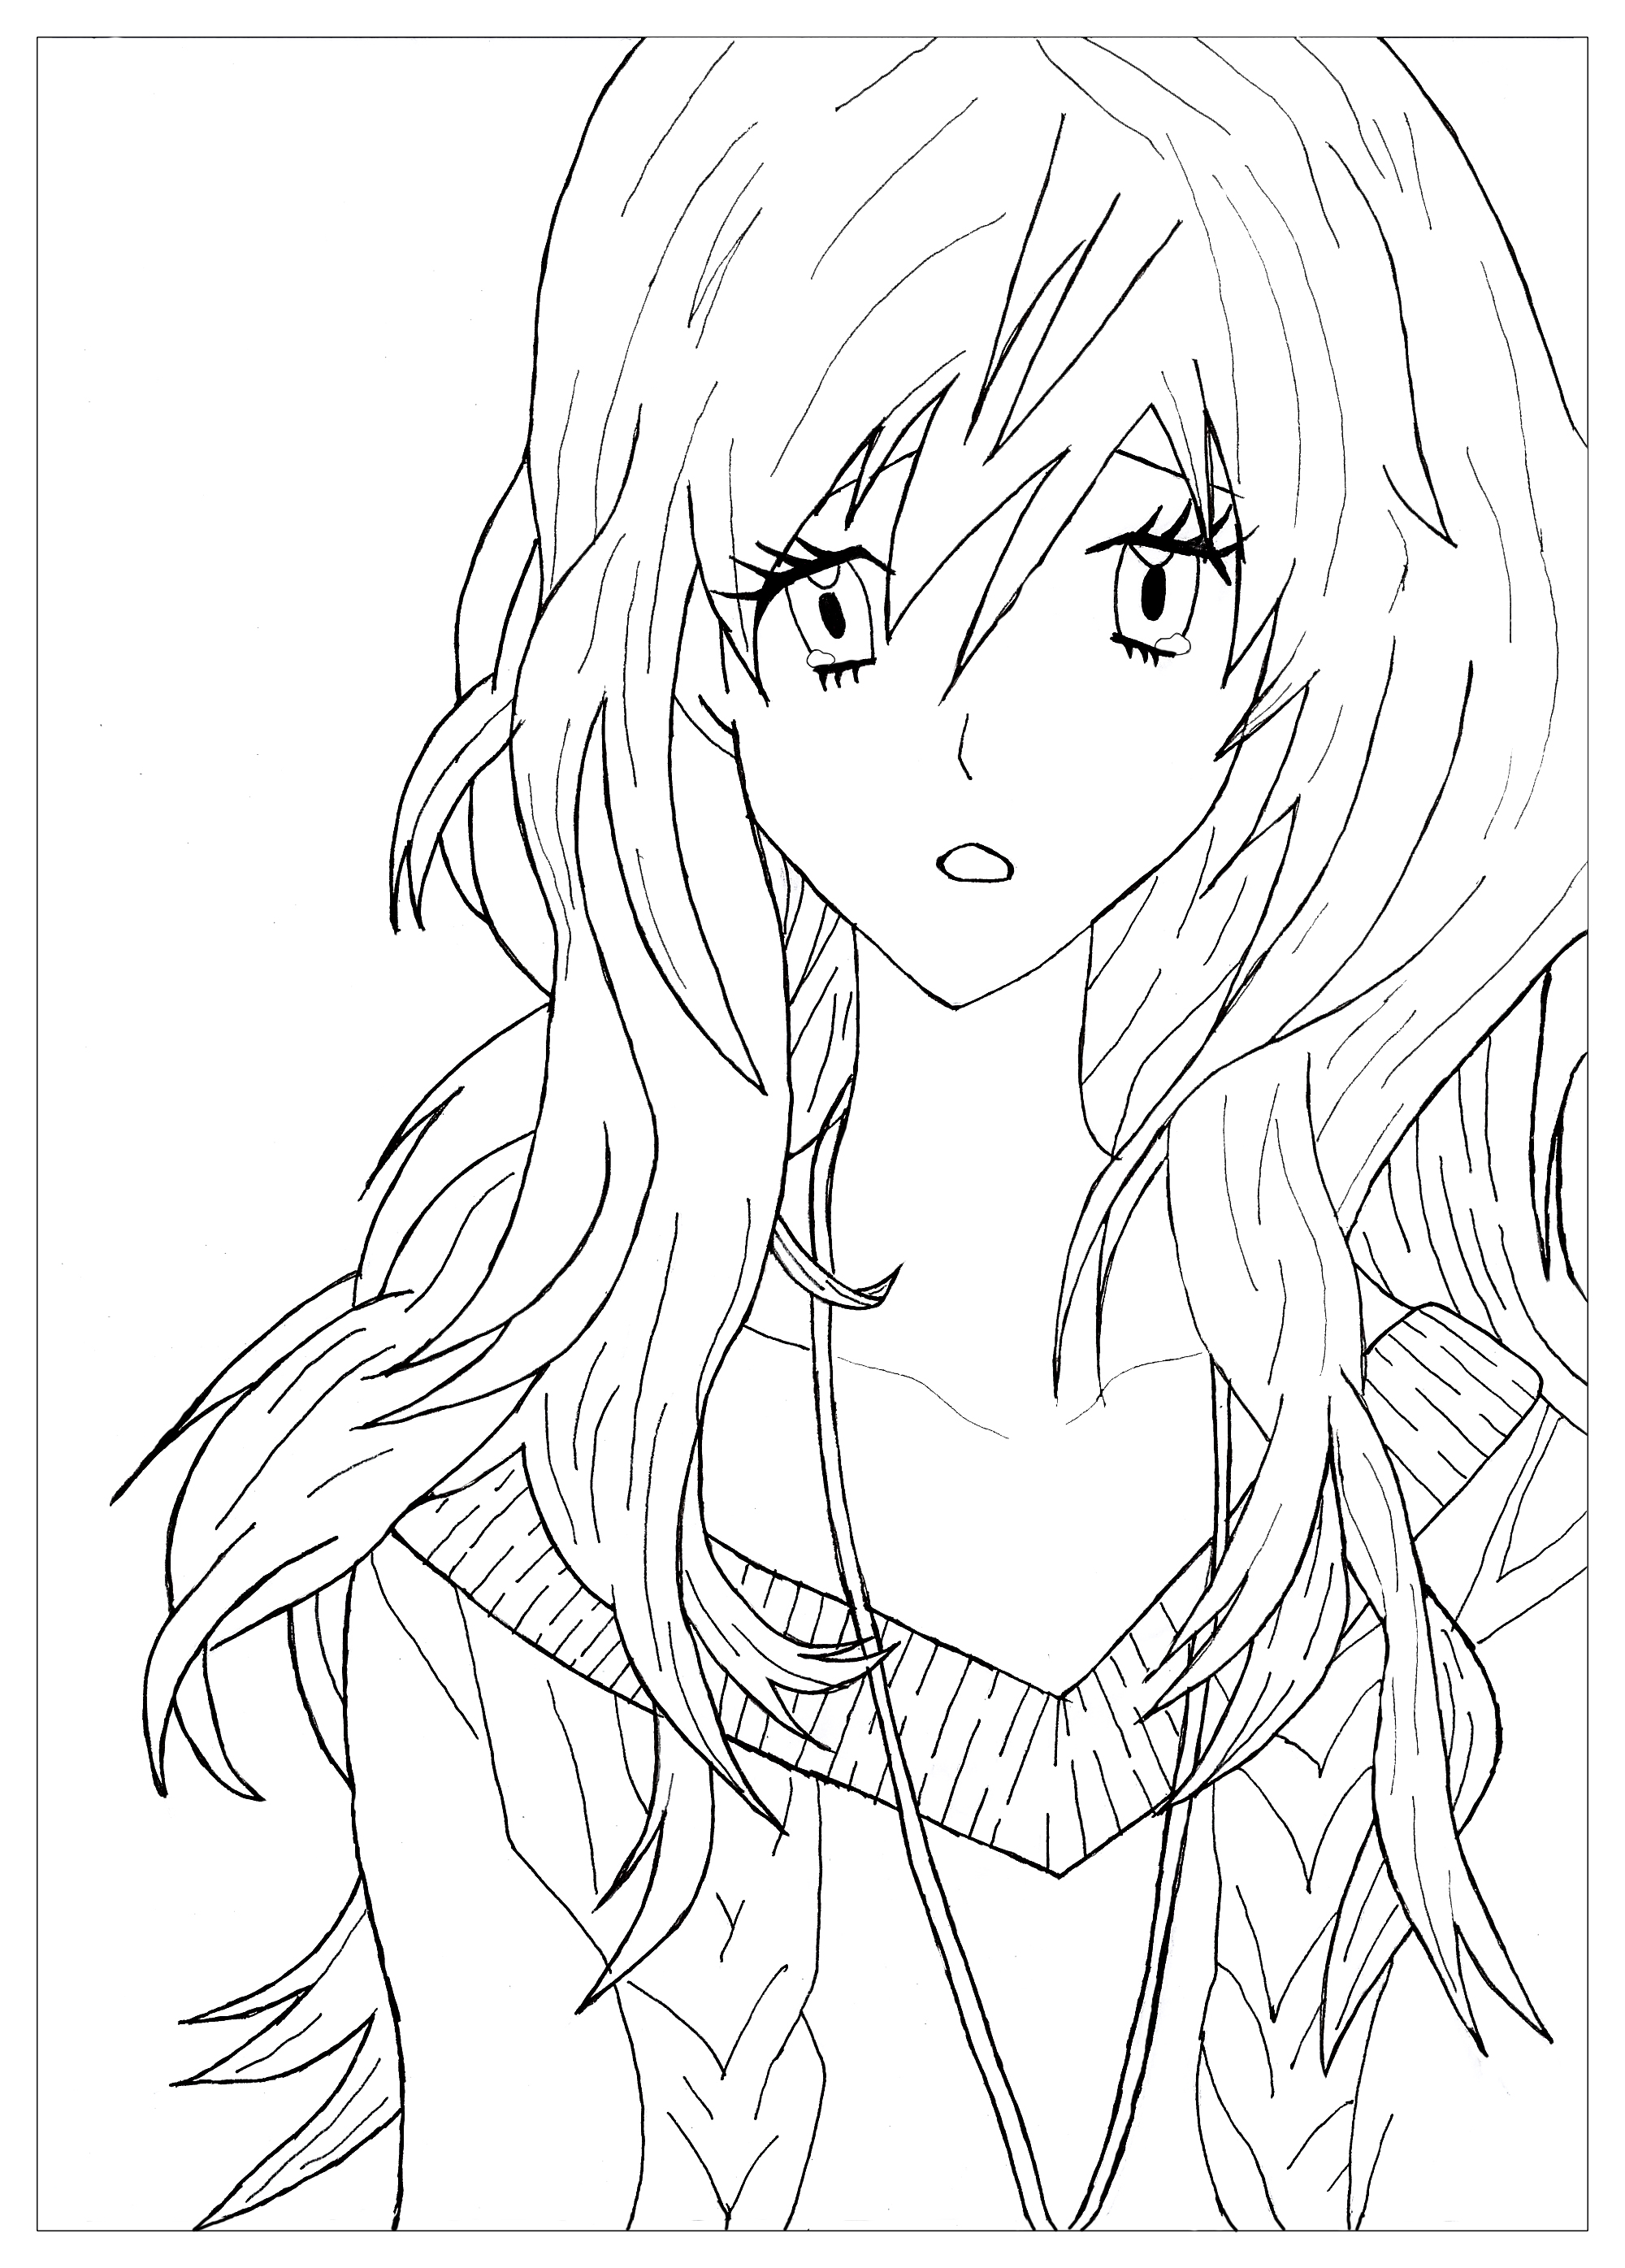 Anime Wolf Girl Coloring Page | Easy Drawing Guides